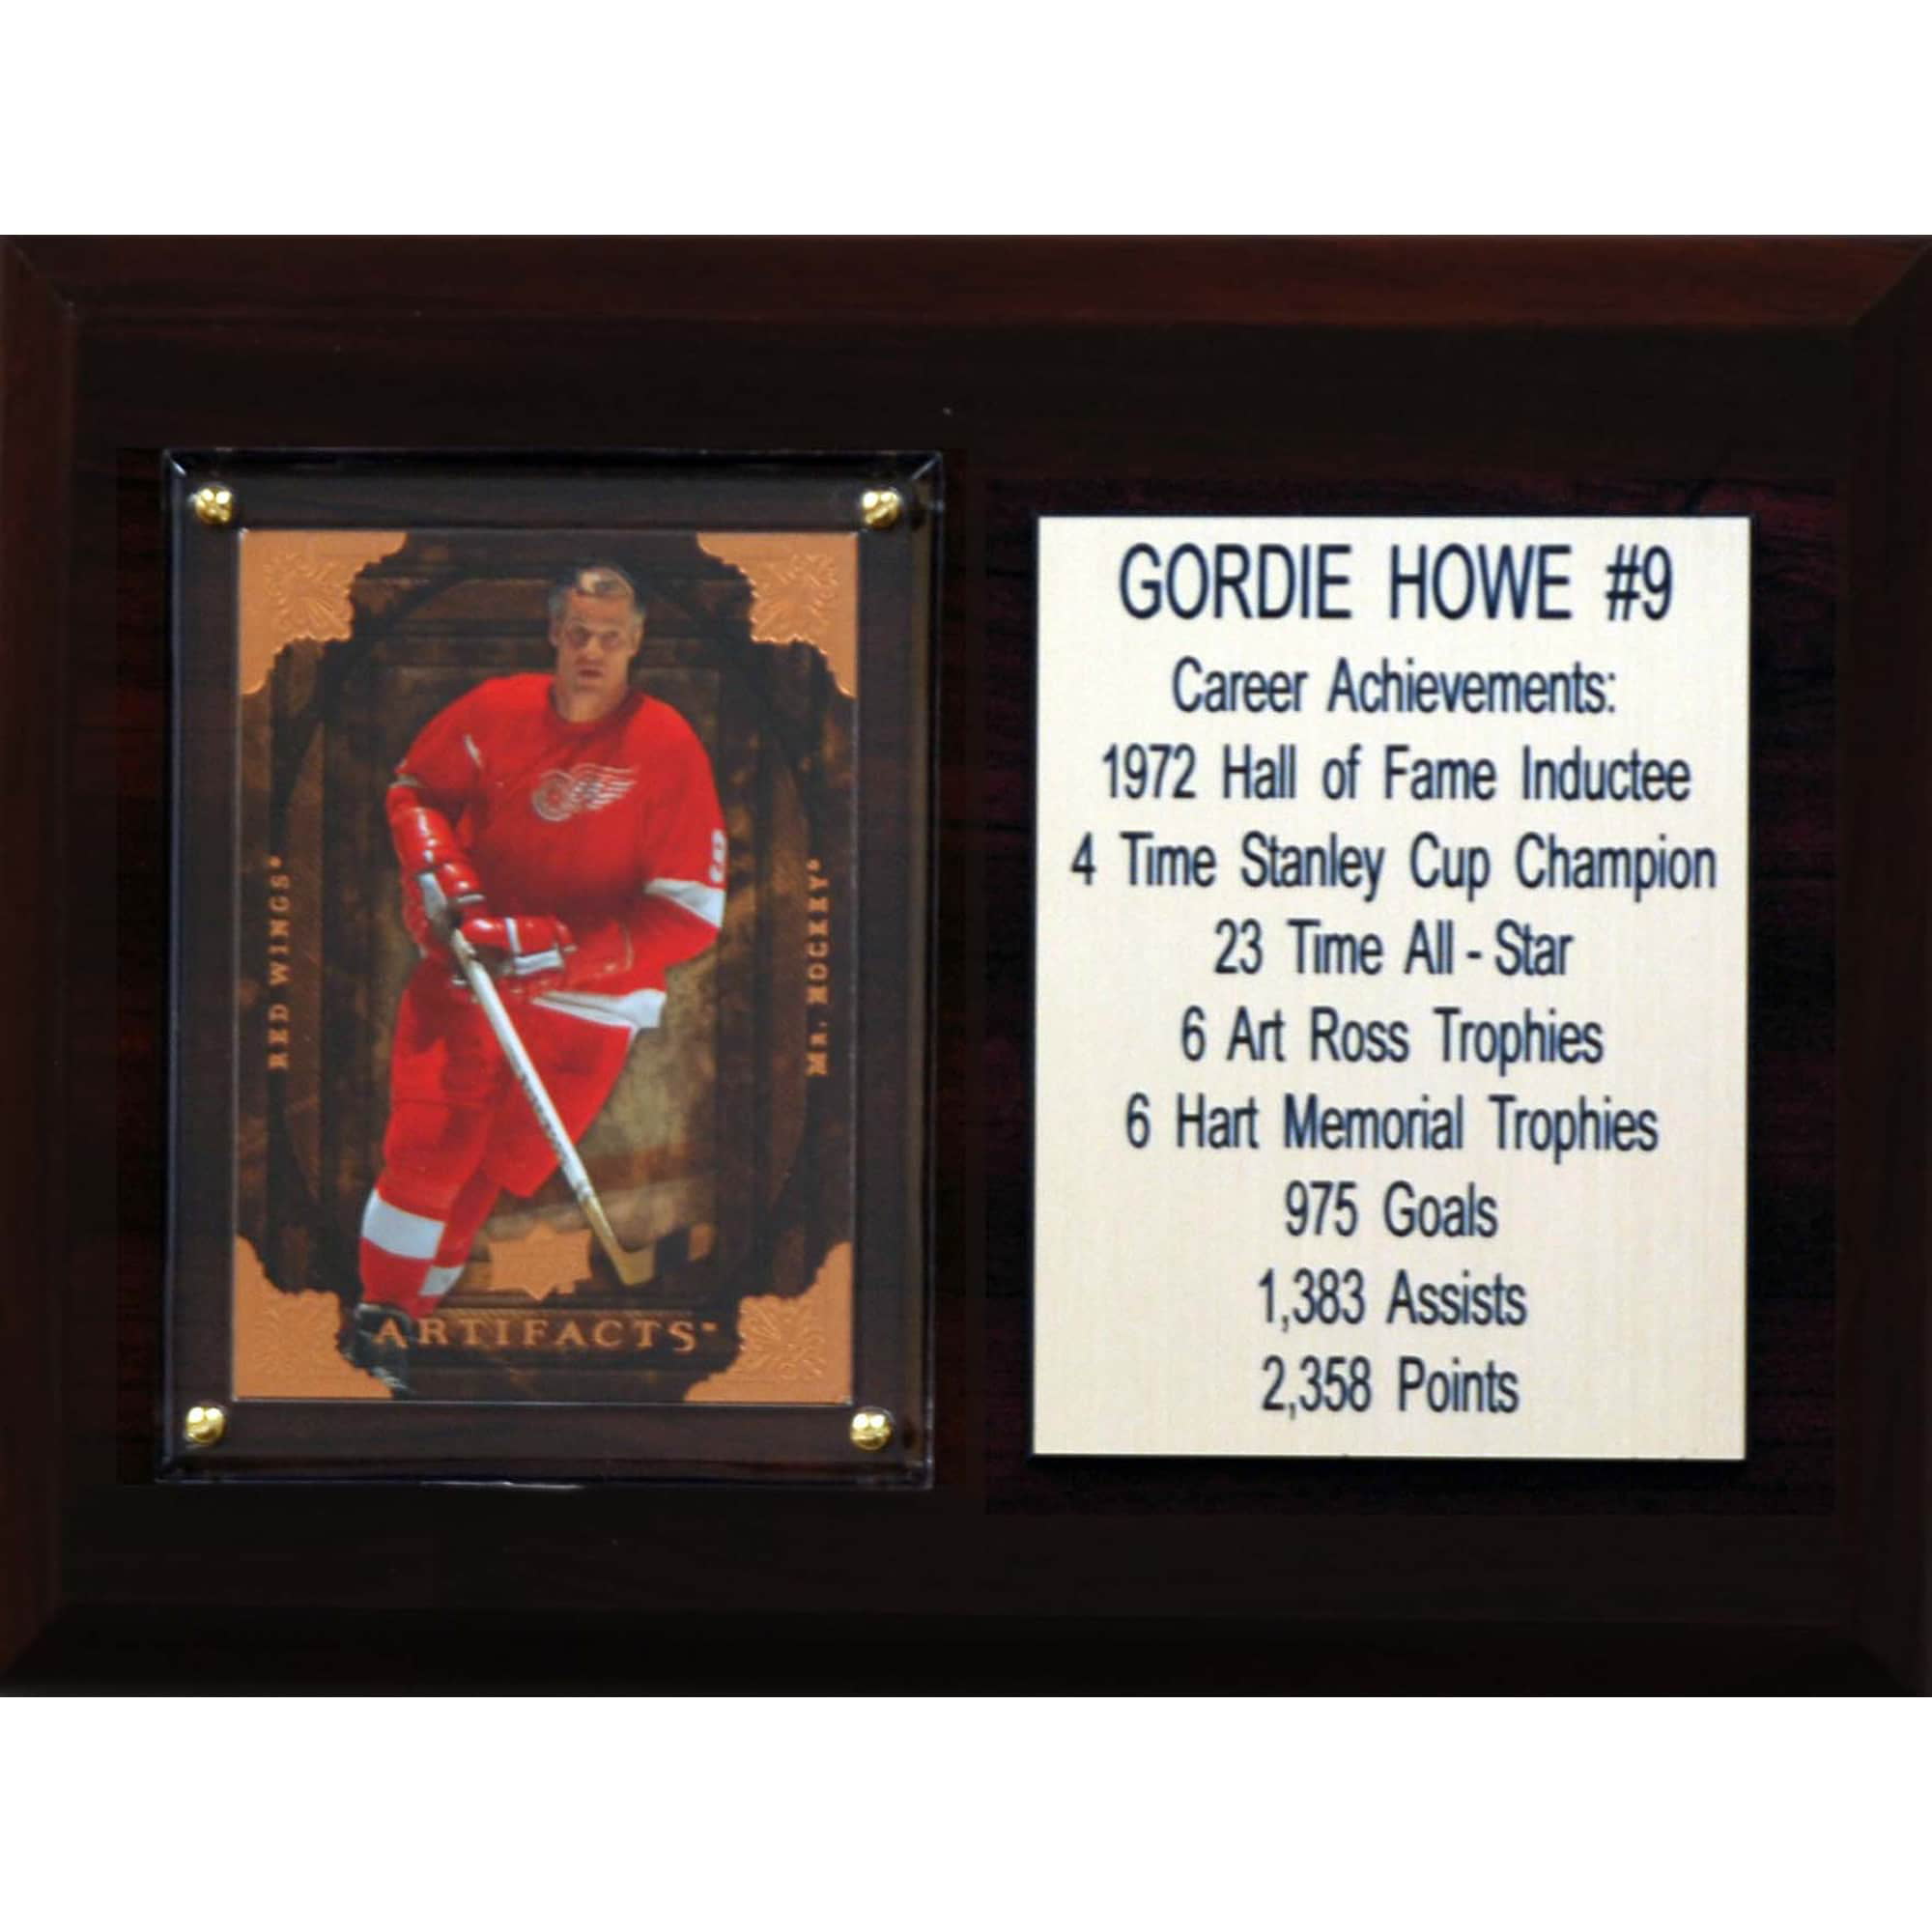 Gordie Howe MR HOCKEY Detroit Red Wings Legend Collectible Toy Action Figure with Trading Card 